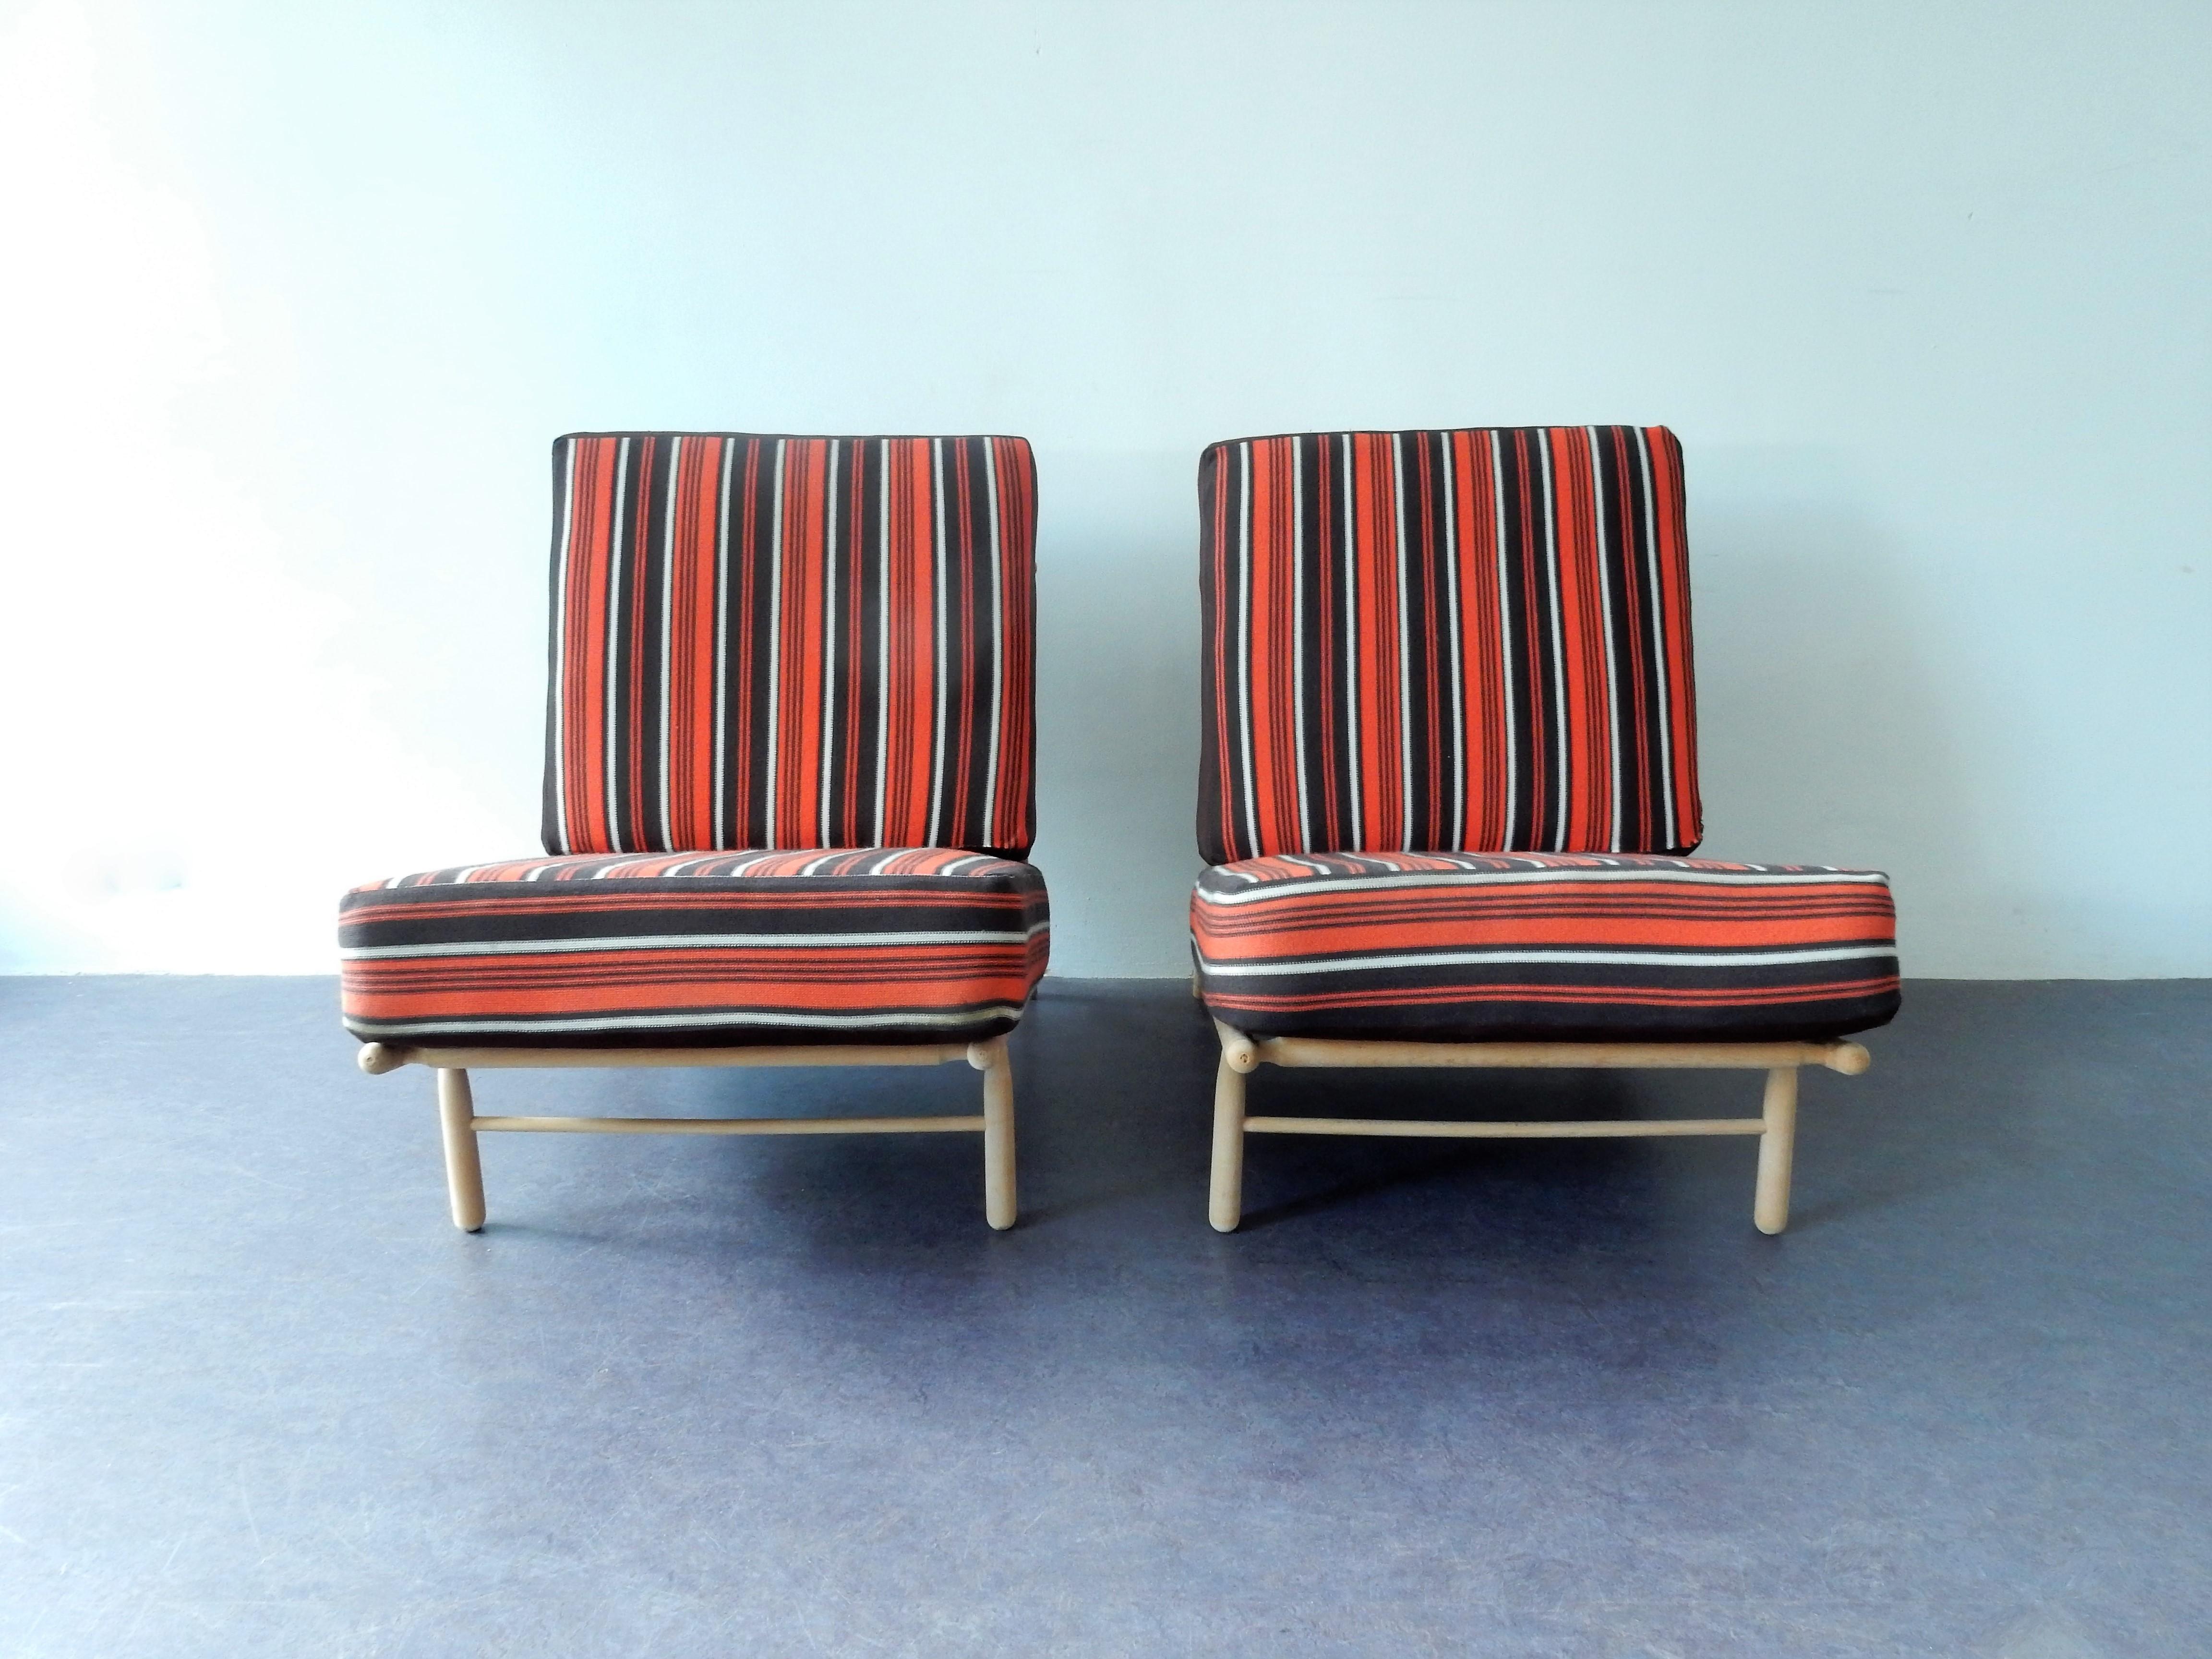 This lounge chair, a variation of model 'DUX 12', was very likely to be designed by Alf Svensson for DUX in Sweden in the 1950s. It has an airy looking wooden frame that is made of untreaded beech wood. The 2 (per chair) spring cushions have some